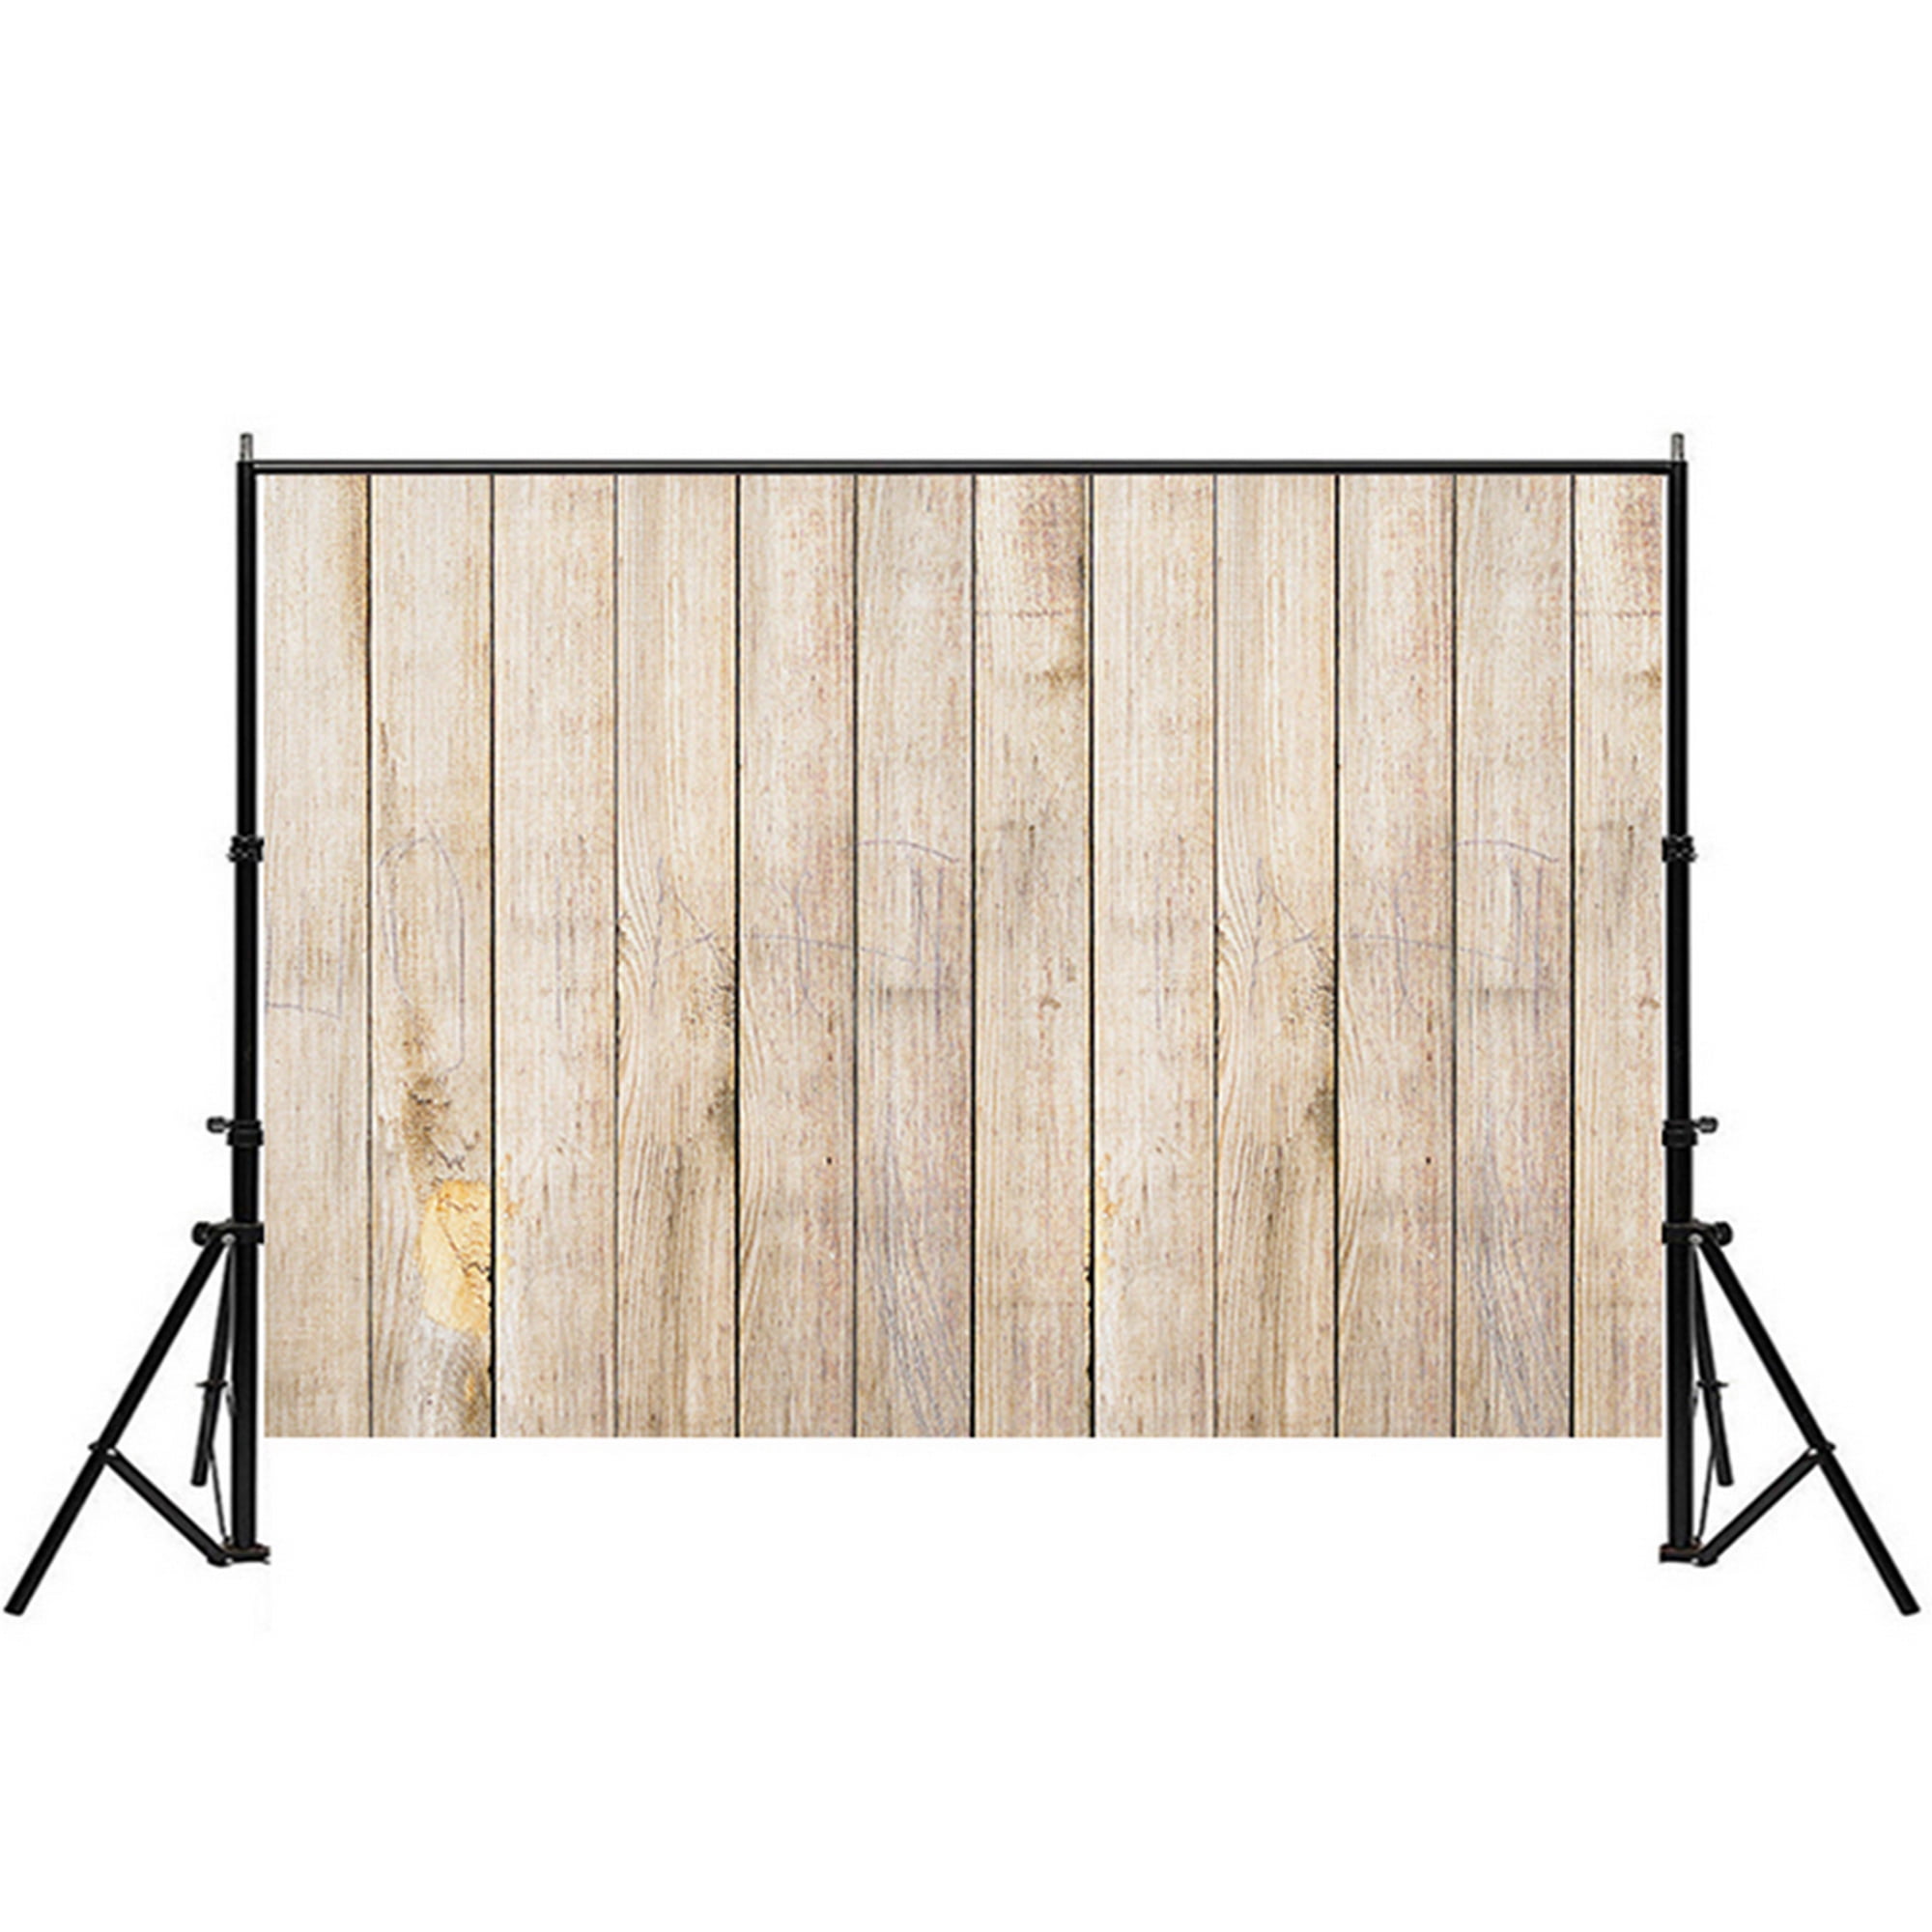 7x10 FT Letter J Vinyl Photography Backdrop,Summer Holiday on Tropical Beach Theme J Rustic Old Wood Planks Background for Baby Birthday Party Wedding Studio Props Photography